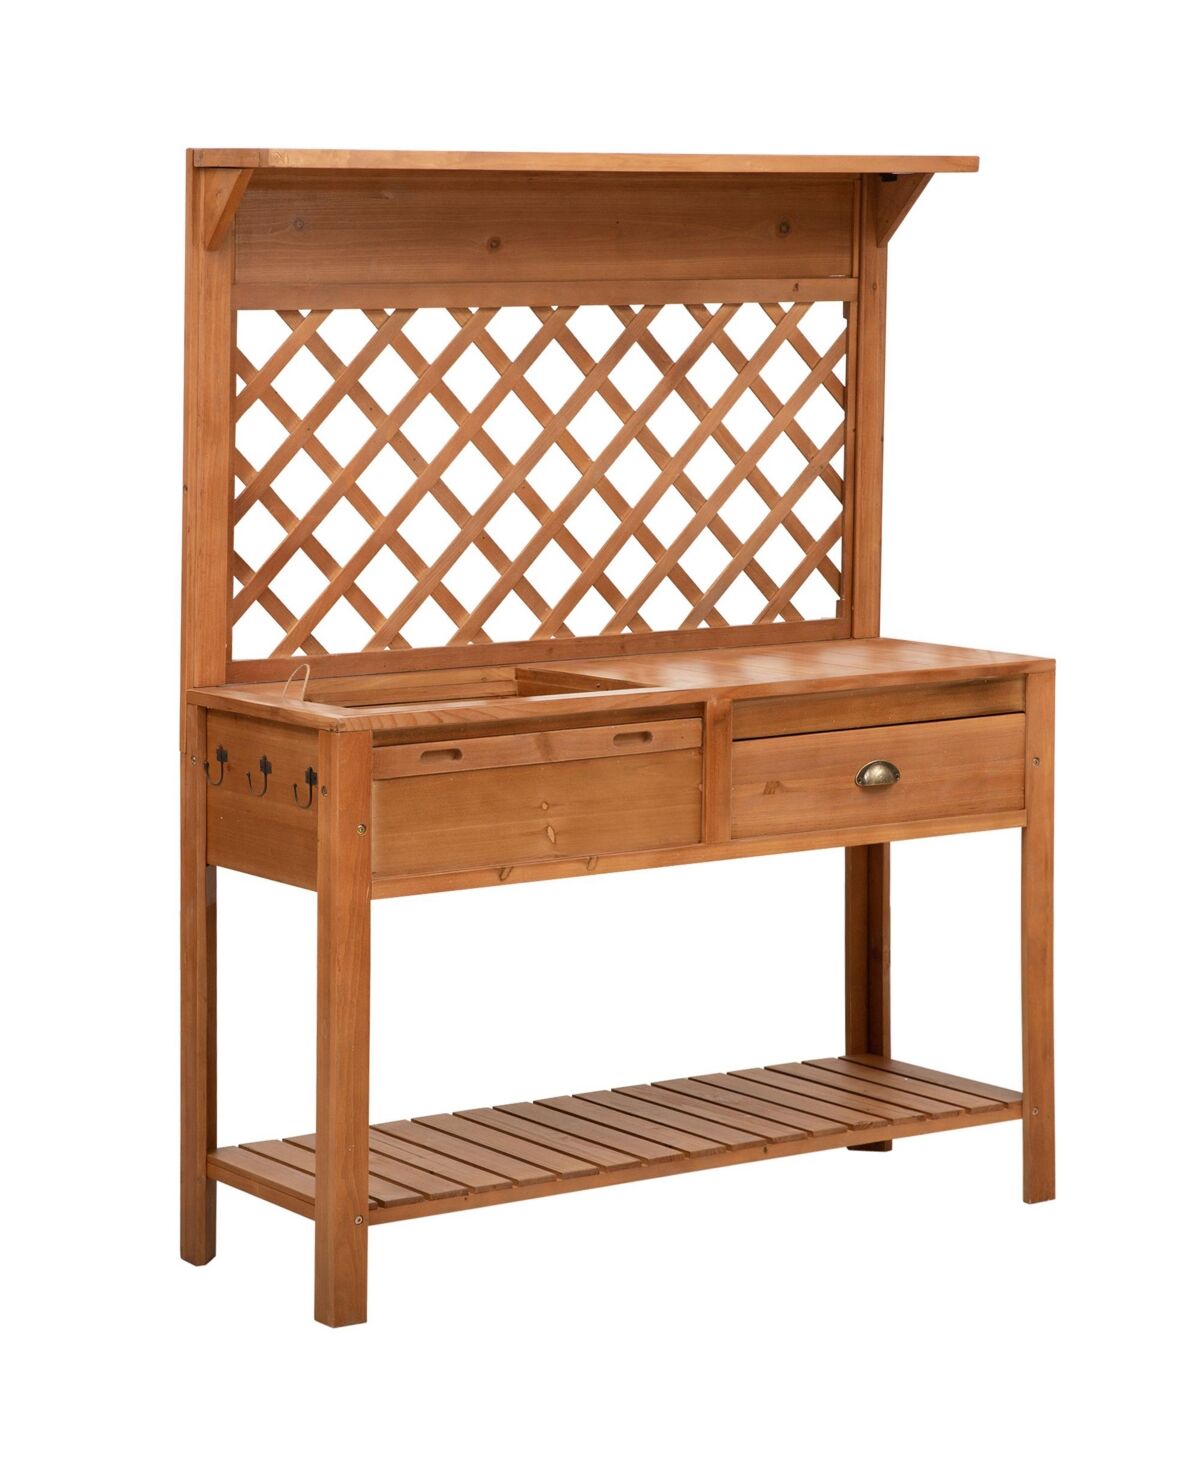 Outsunny Garden Potting Bench Table Wooden Workstation w/ Metal Screen, Drawer - Natural